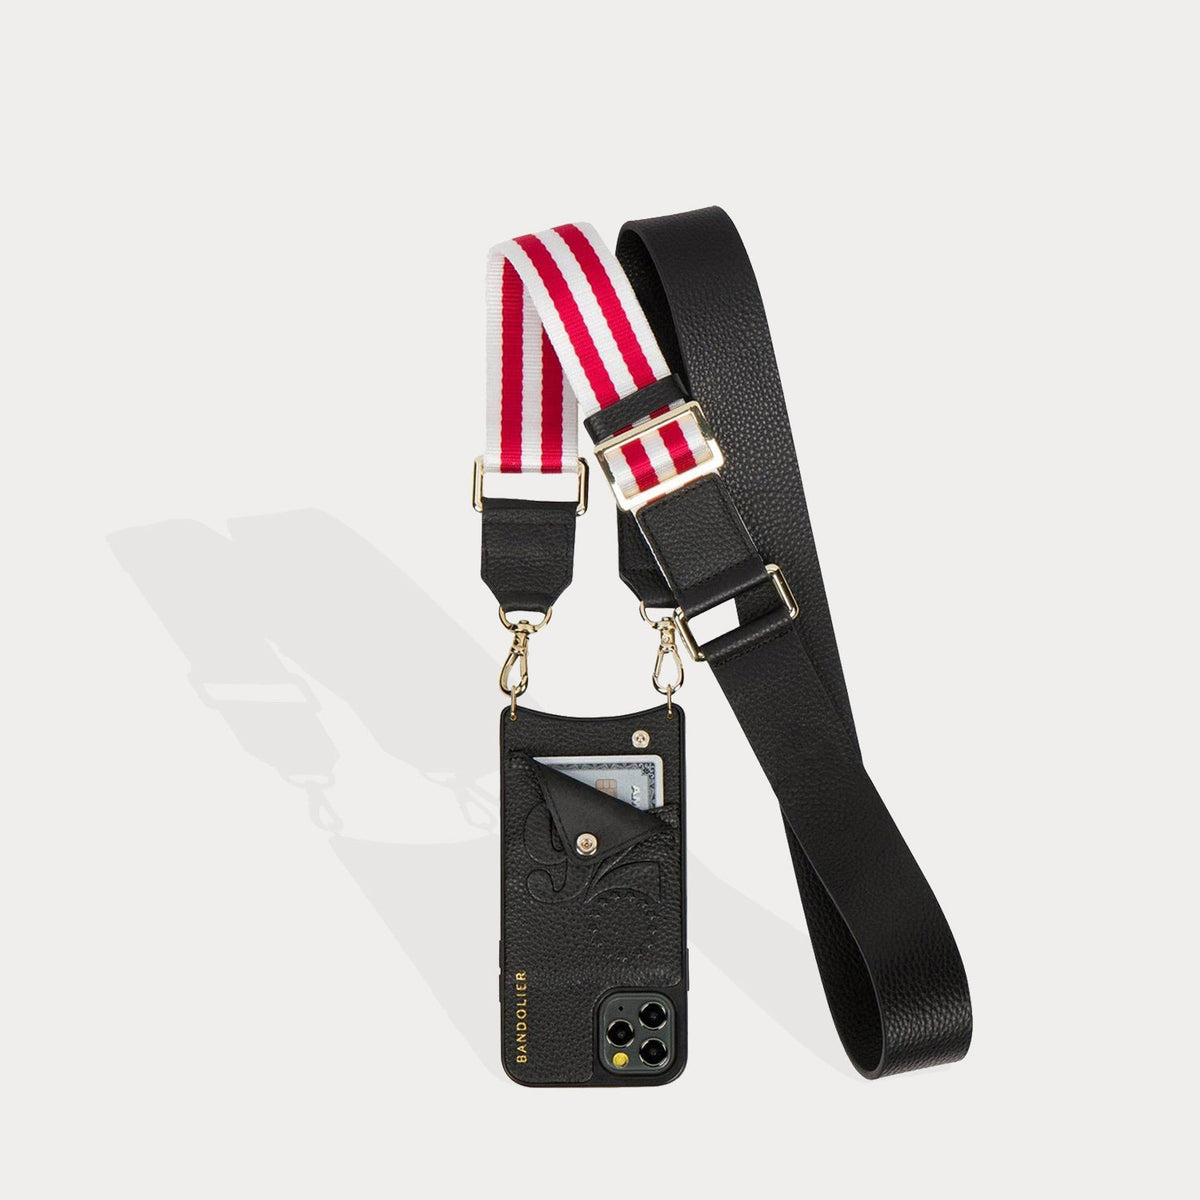 Extra Petite Genuine Leather Strap - 3/8-Inch Wide - Short Shoulder to Extra Long Crossbody Lengths - Customize Color and Connector Style